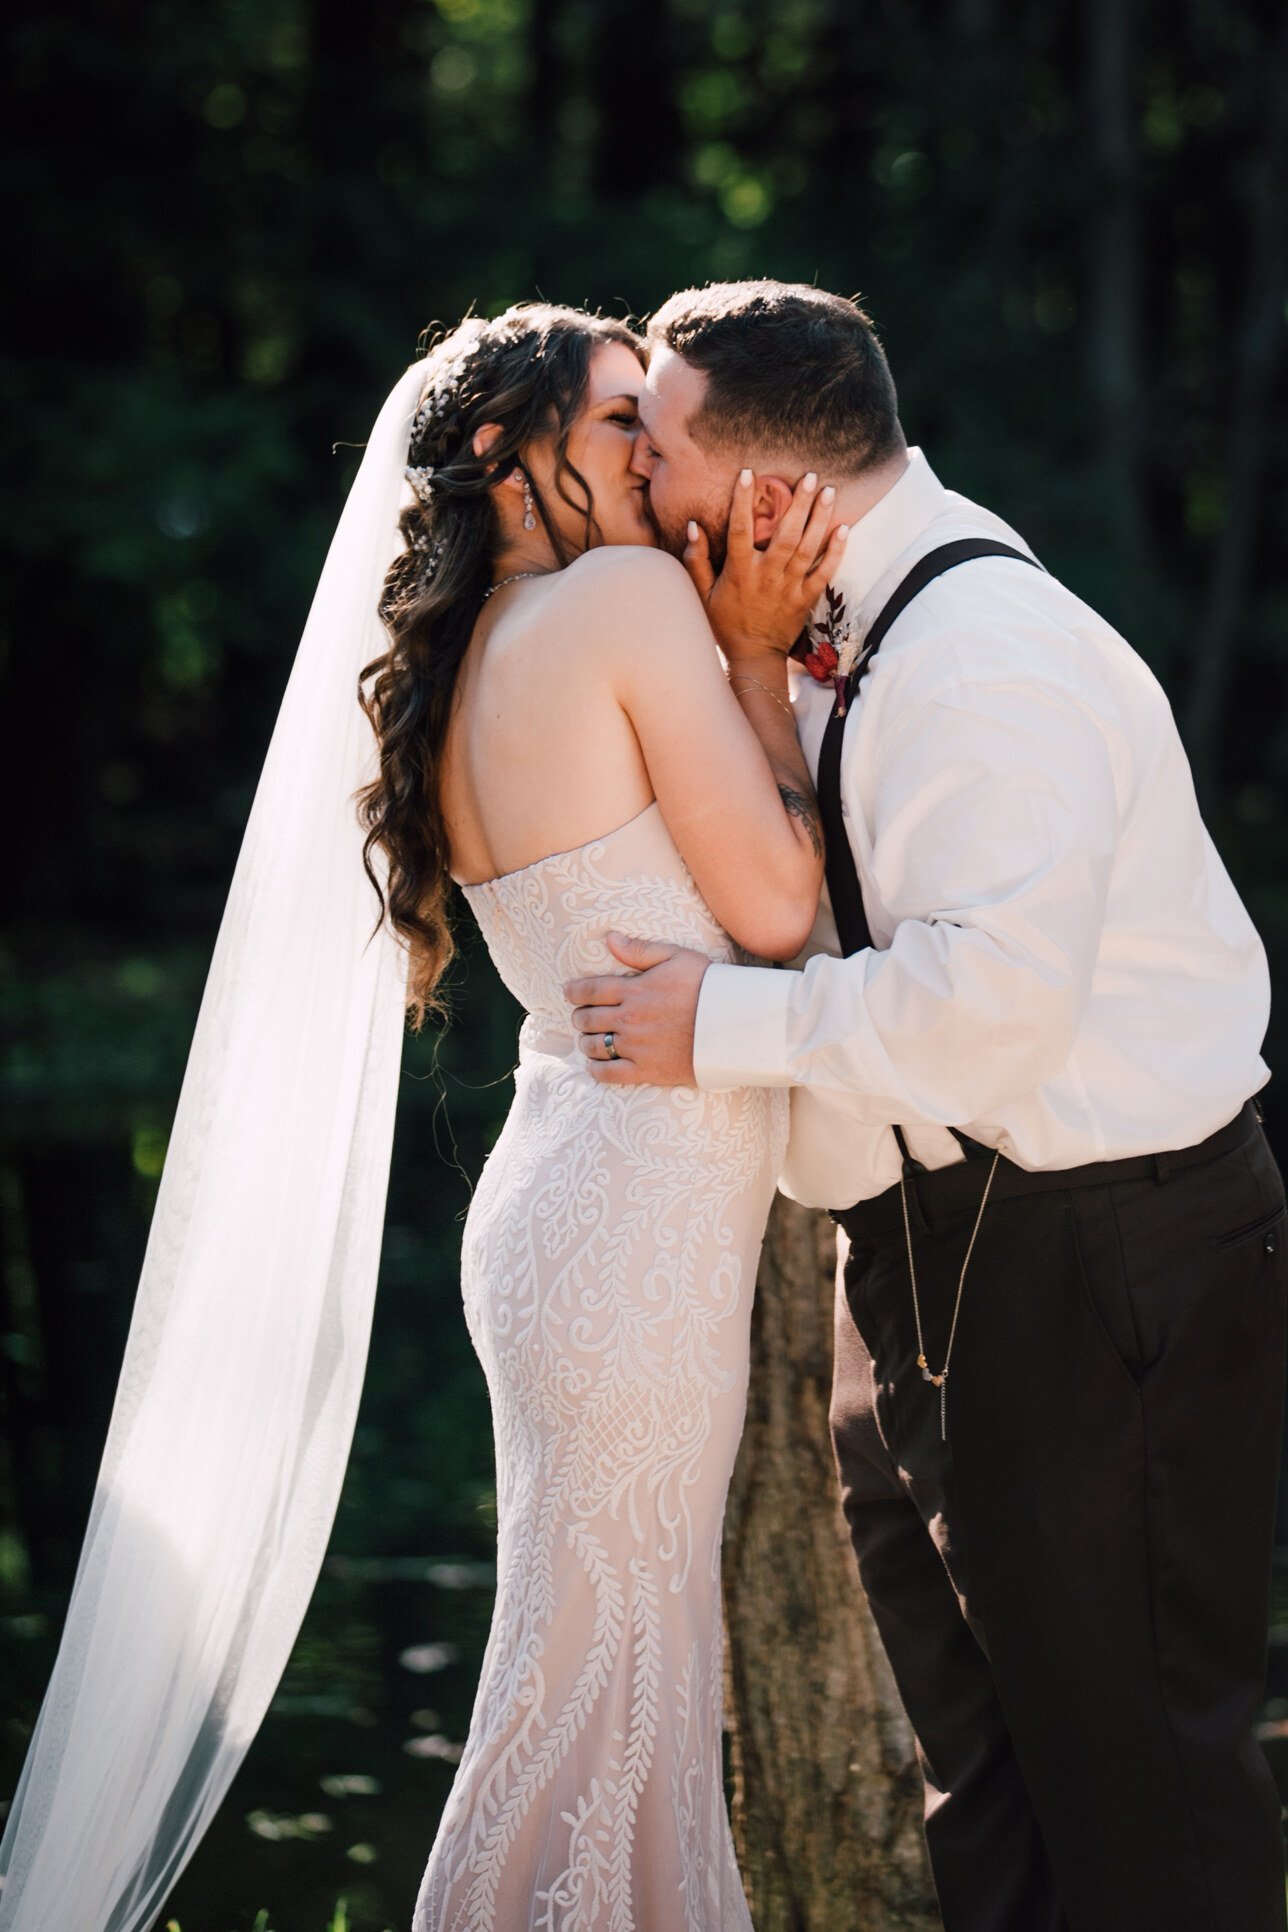  The bride and groom share their first kiss at their outdoor fall wedding 